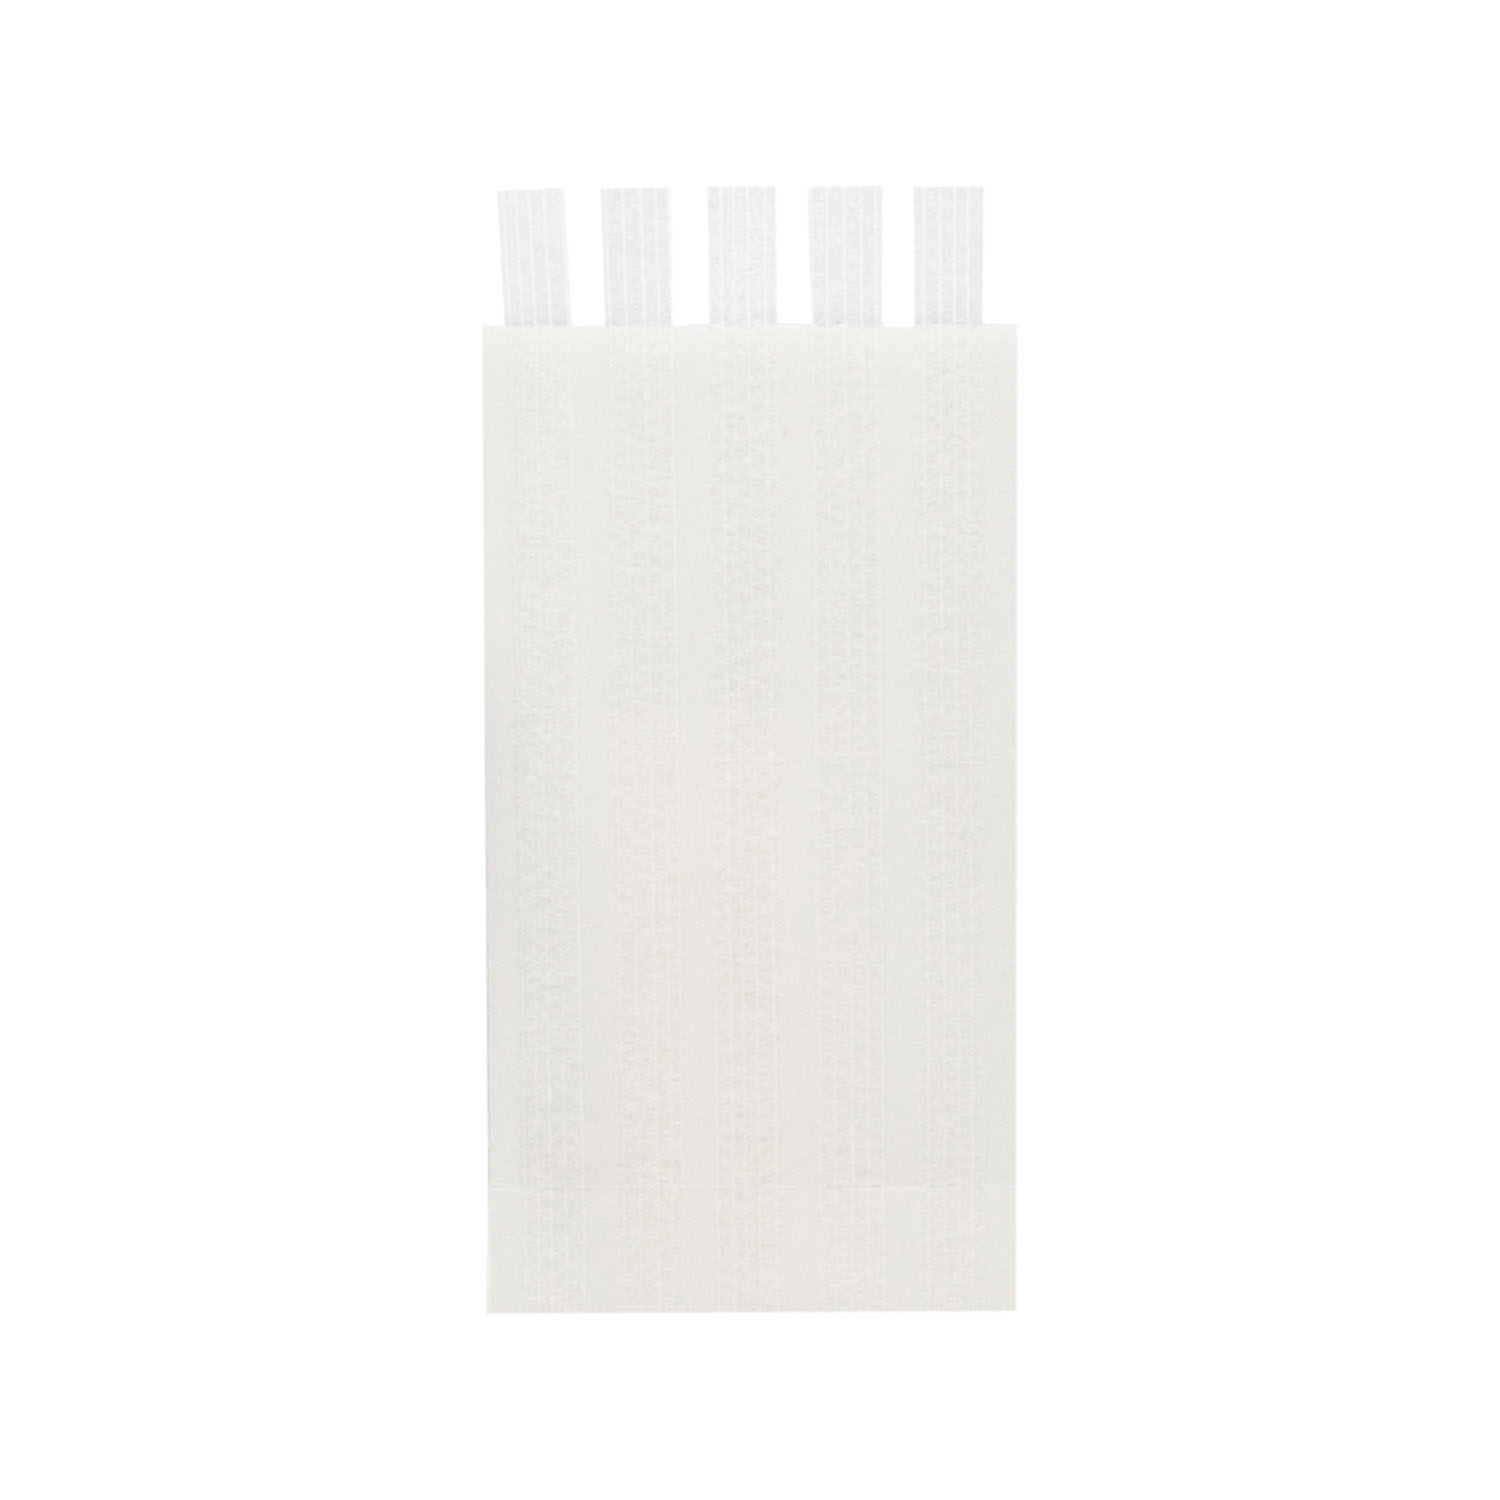 DUKAL WOUND CLOSURE STRIPS : 5156 BX                       $55.87 Stocked